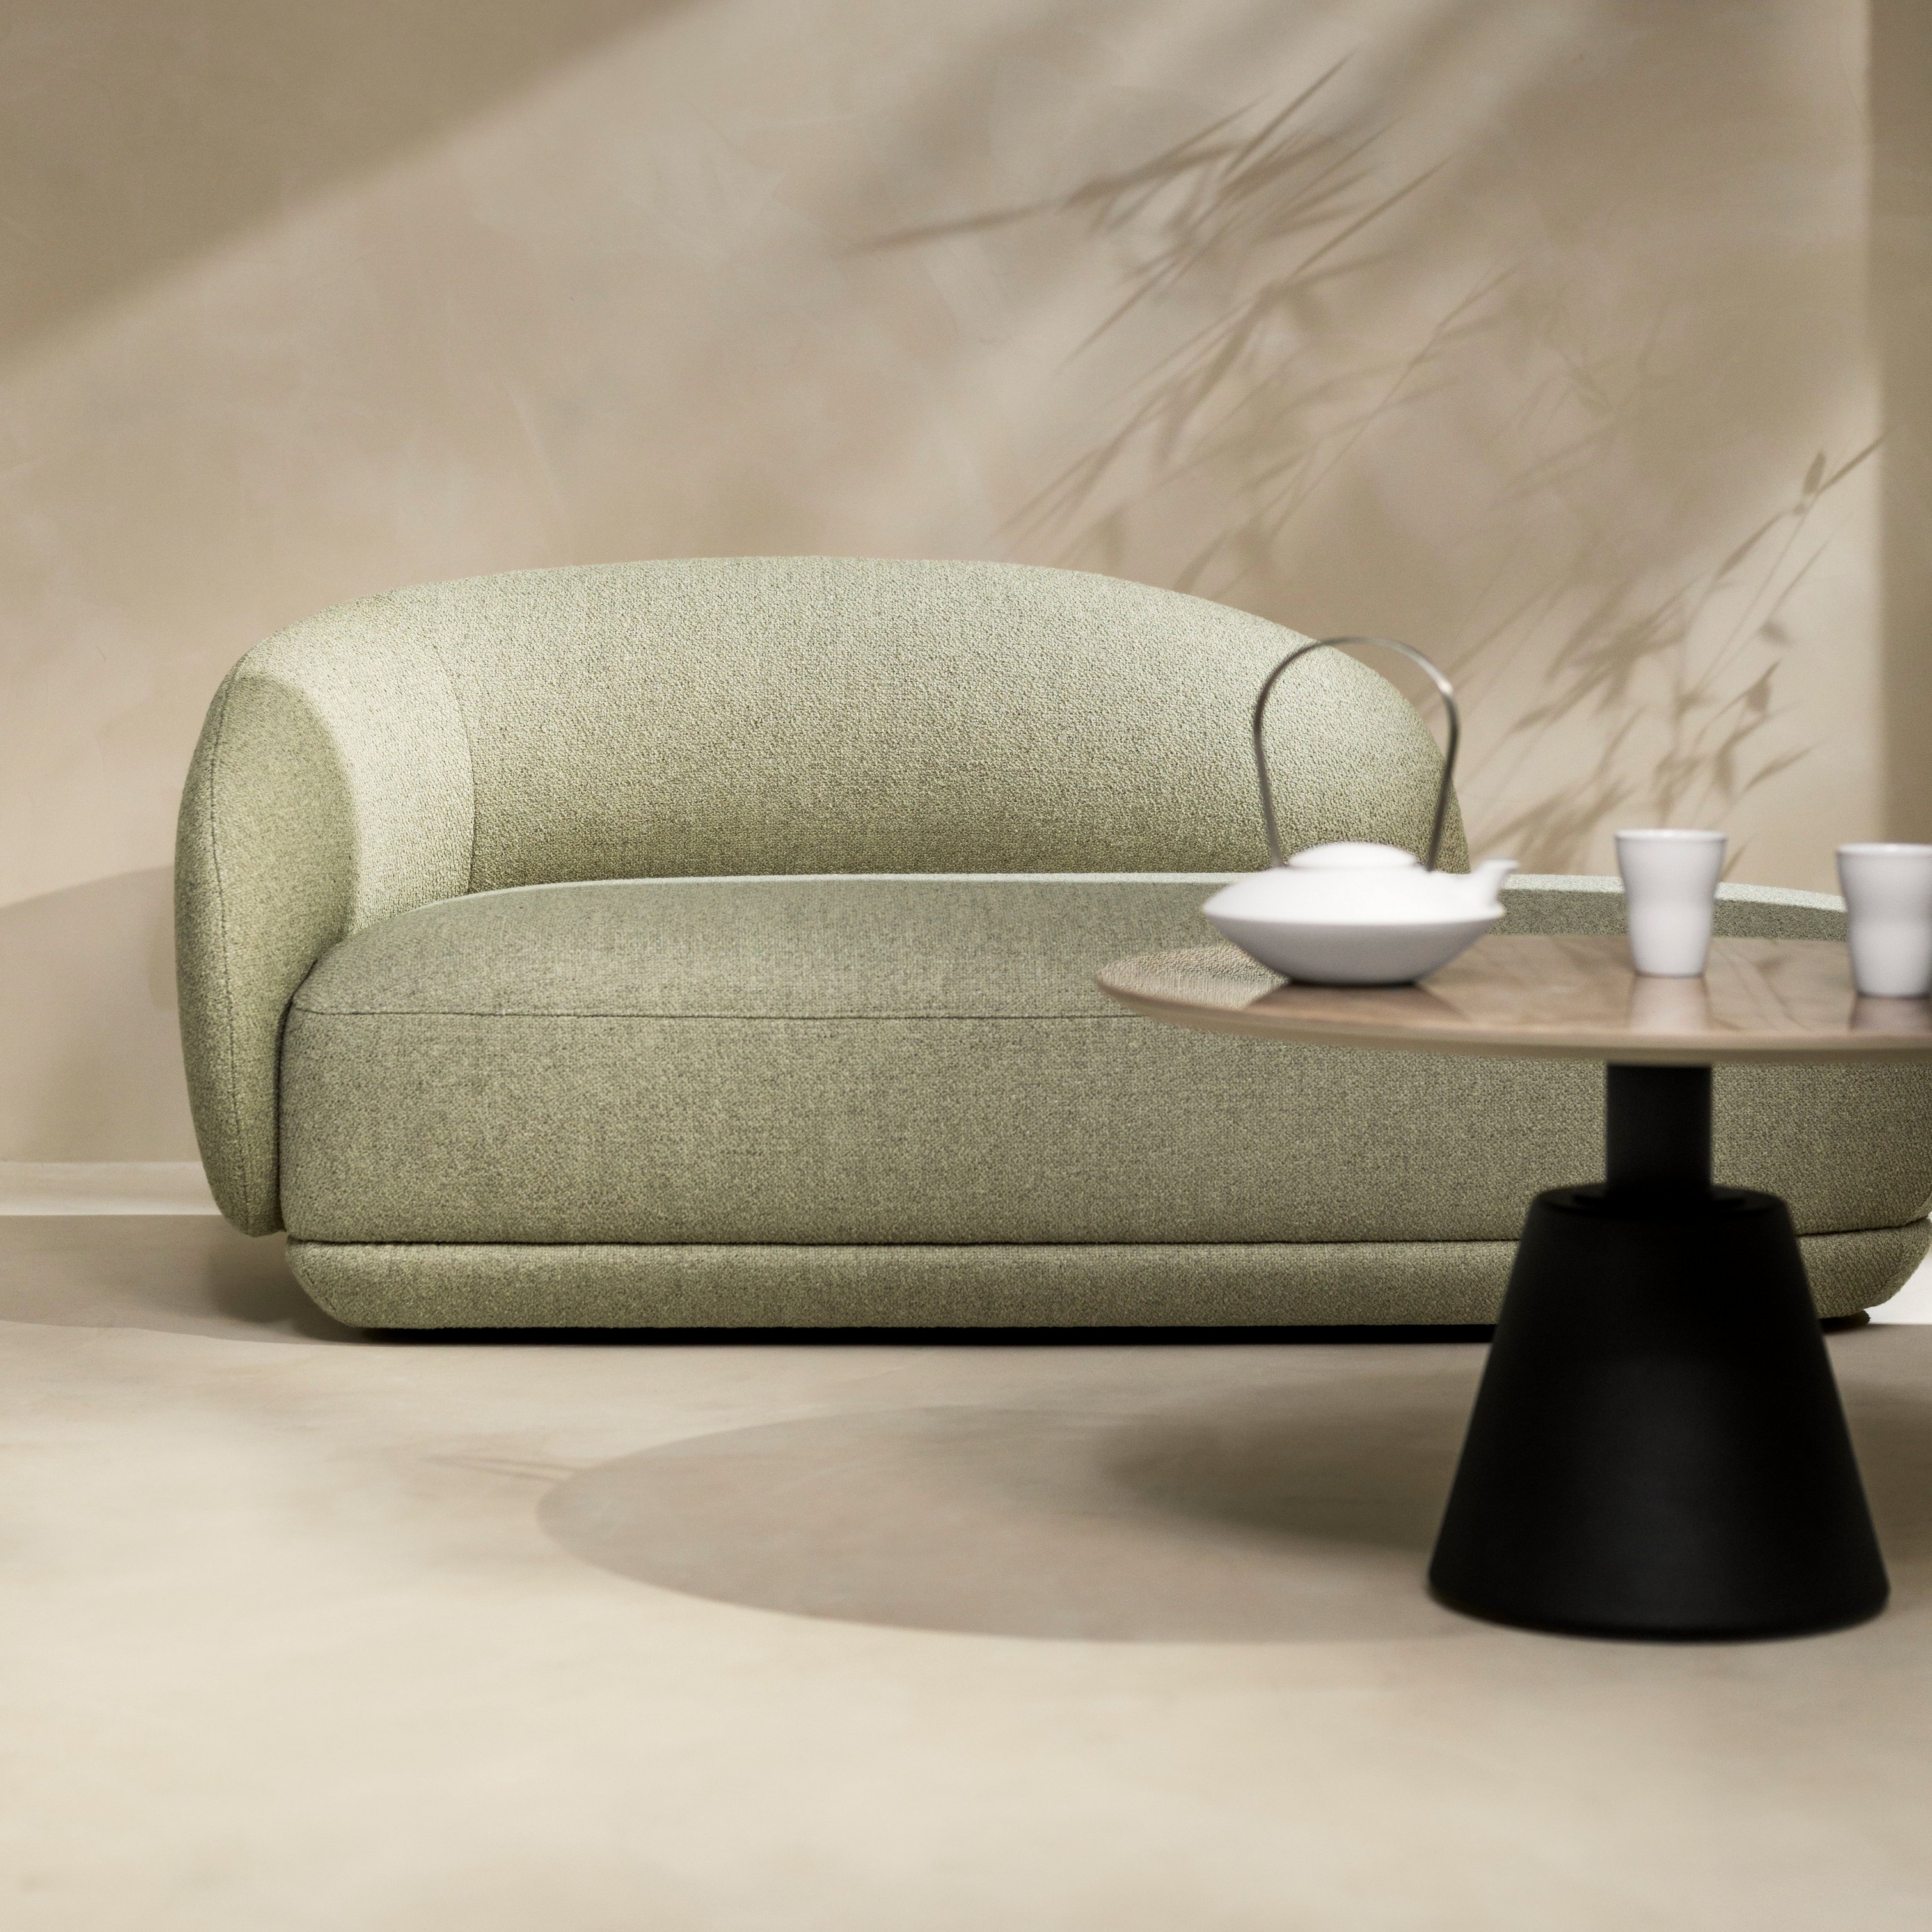 Peaceful living space with the Bolzano chaise longue in light green Lazio fabric